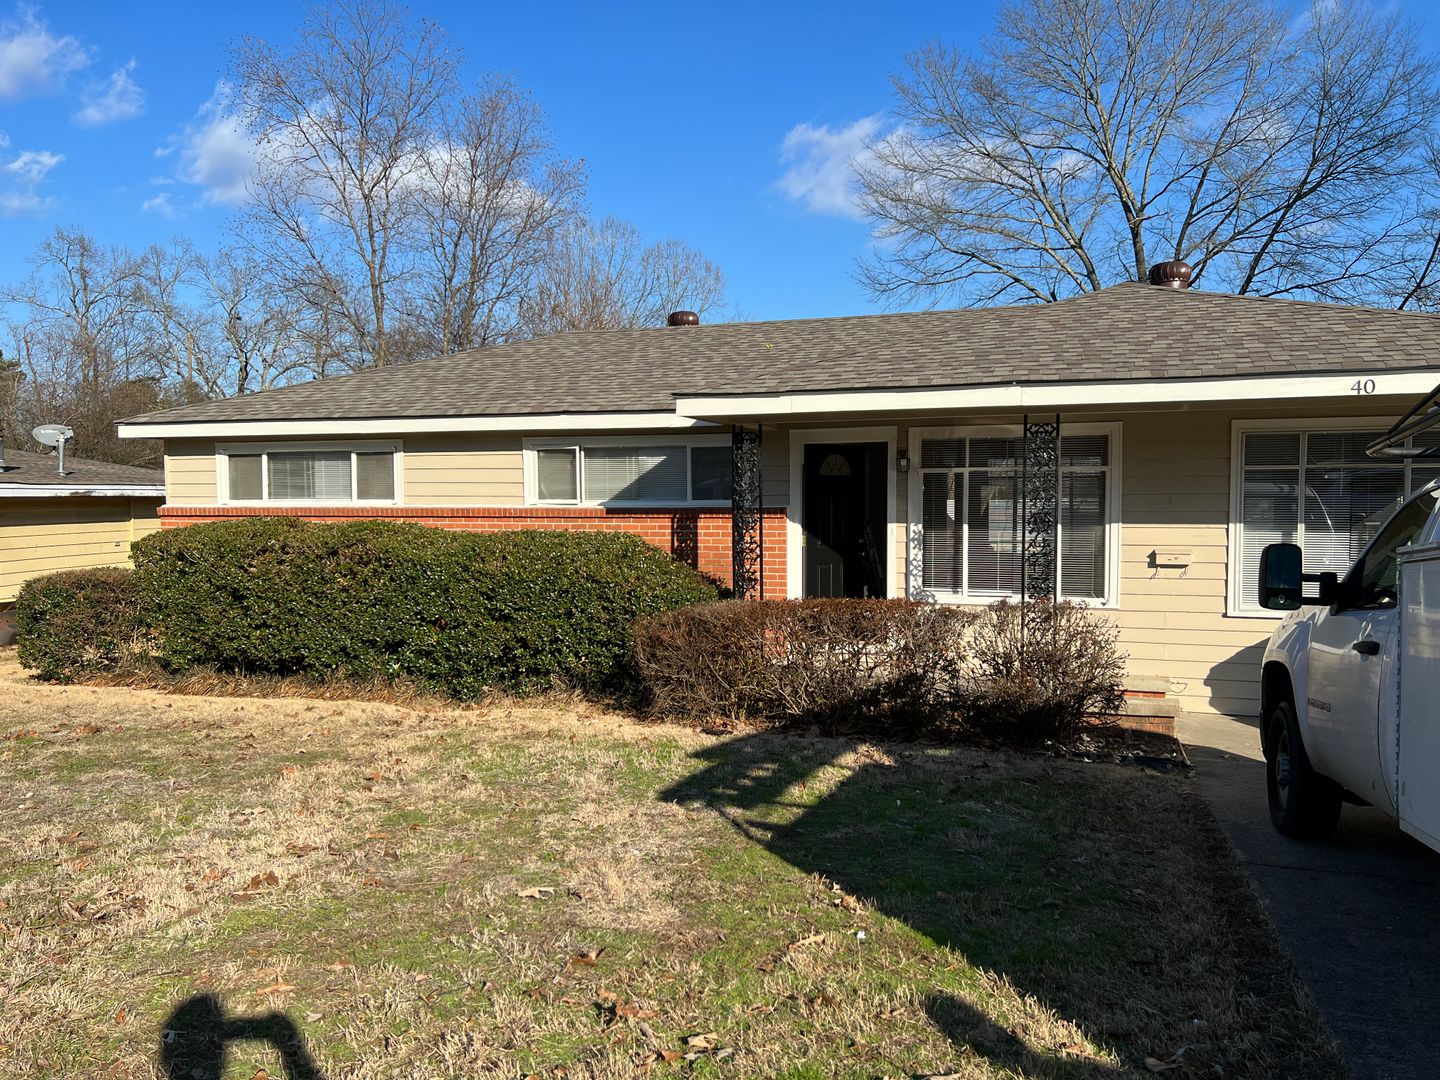 40 Barbara, Little Rock AR 72204 - Nice and affordable 3br 1ba in Point O Woods near UALR